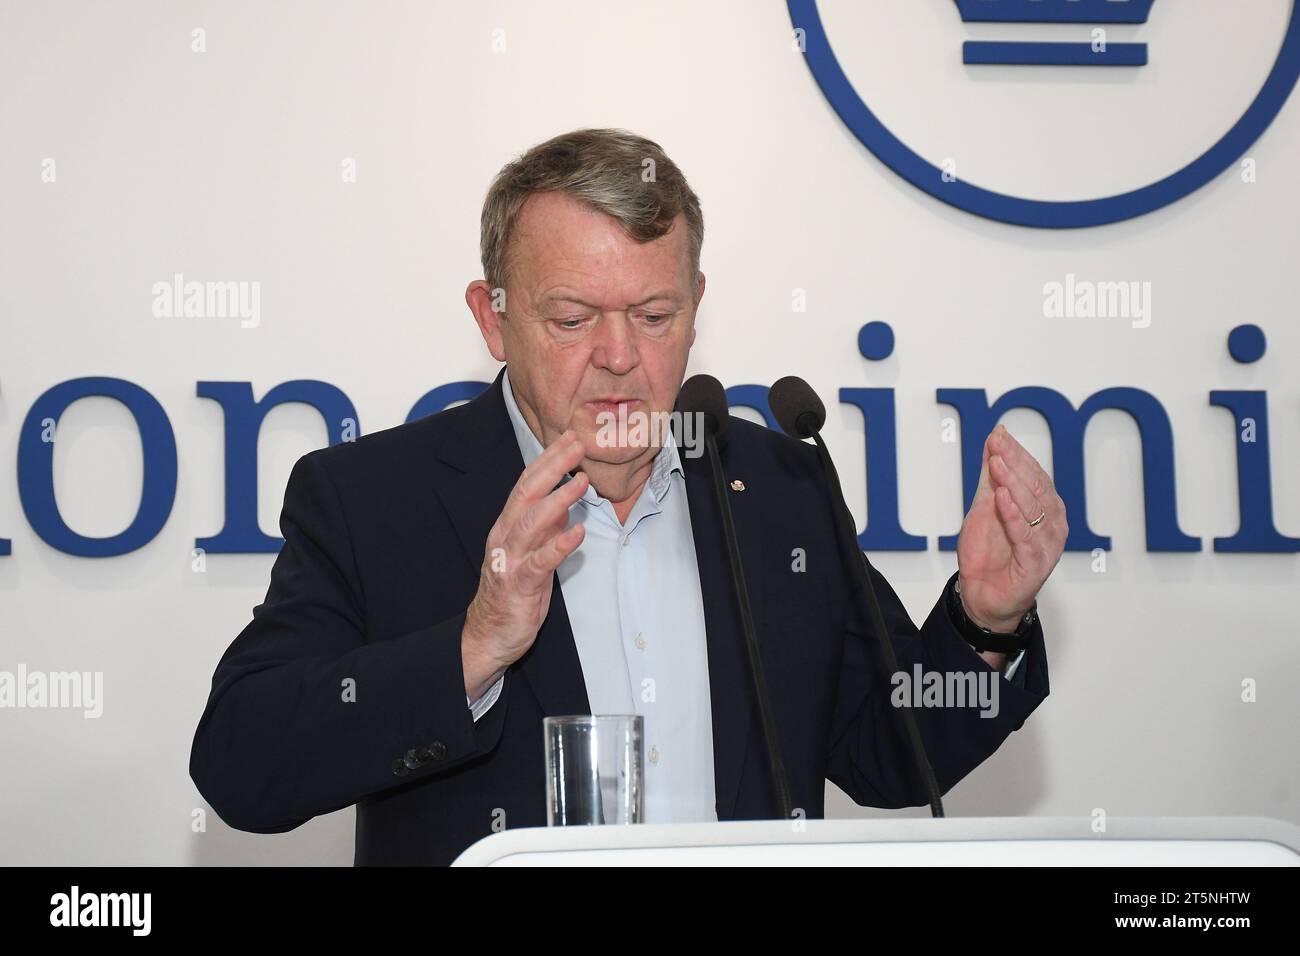 Copenhagen, Denmark /06 November 2023/.  Lars Lokke Rasmussen, former primem minister of Denmark and now present as danish minister for foreign affais  holds pressconference and leader oof mderate party of Denmark.  (Photo.Francis Joseph Dean/Dean Pictures) Stock Photo